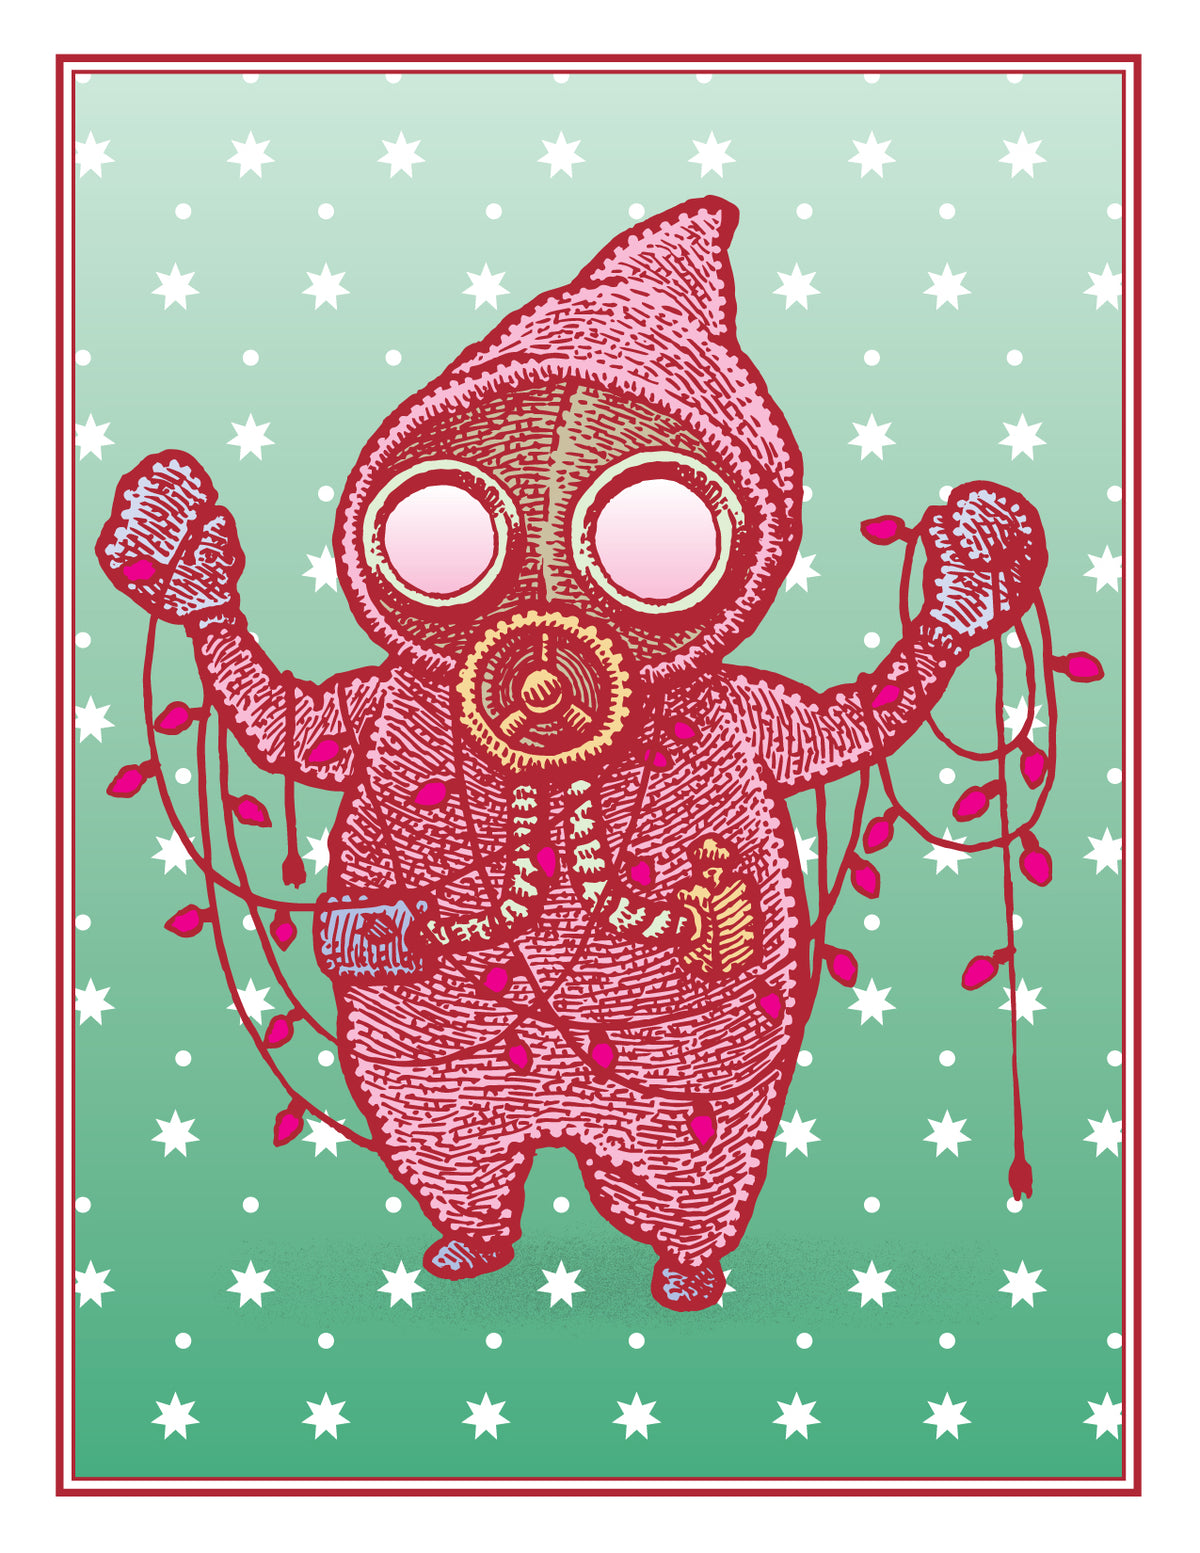 Infectious Holiday Spirit Greeting Cards (20-Pack)